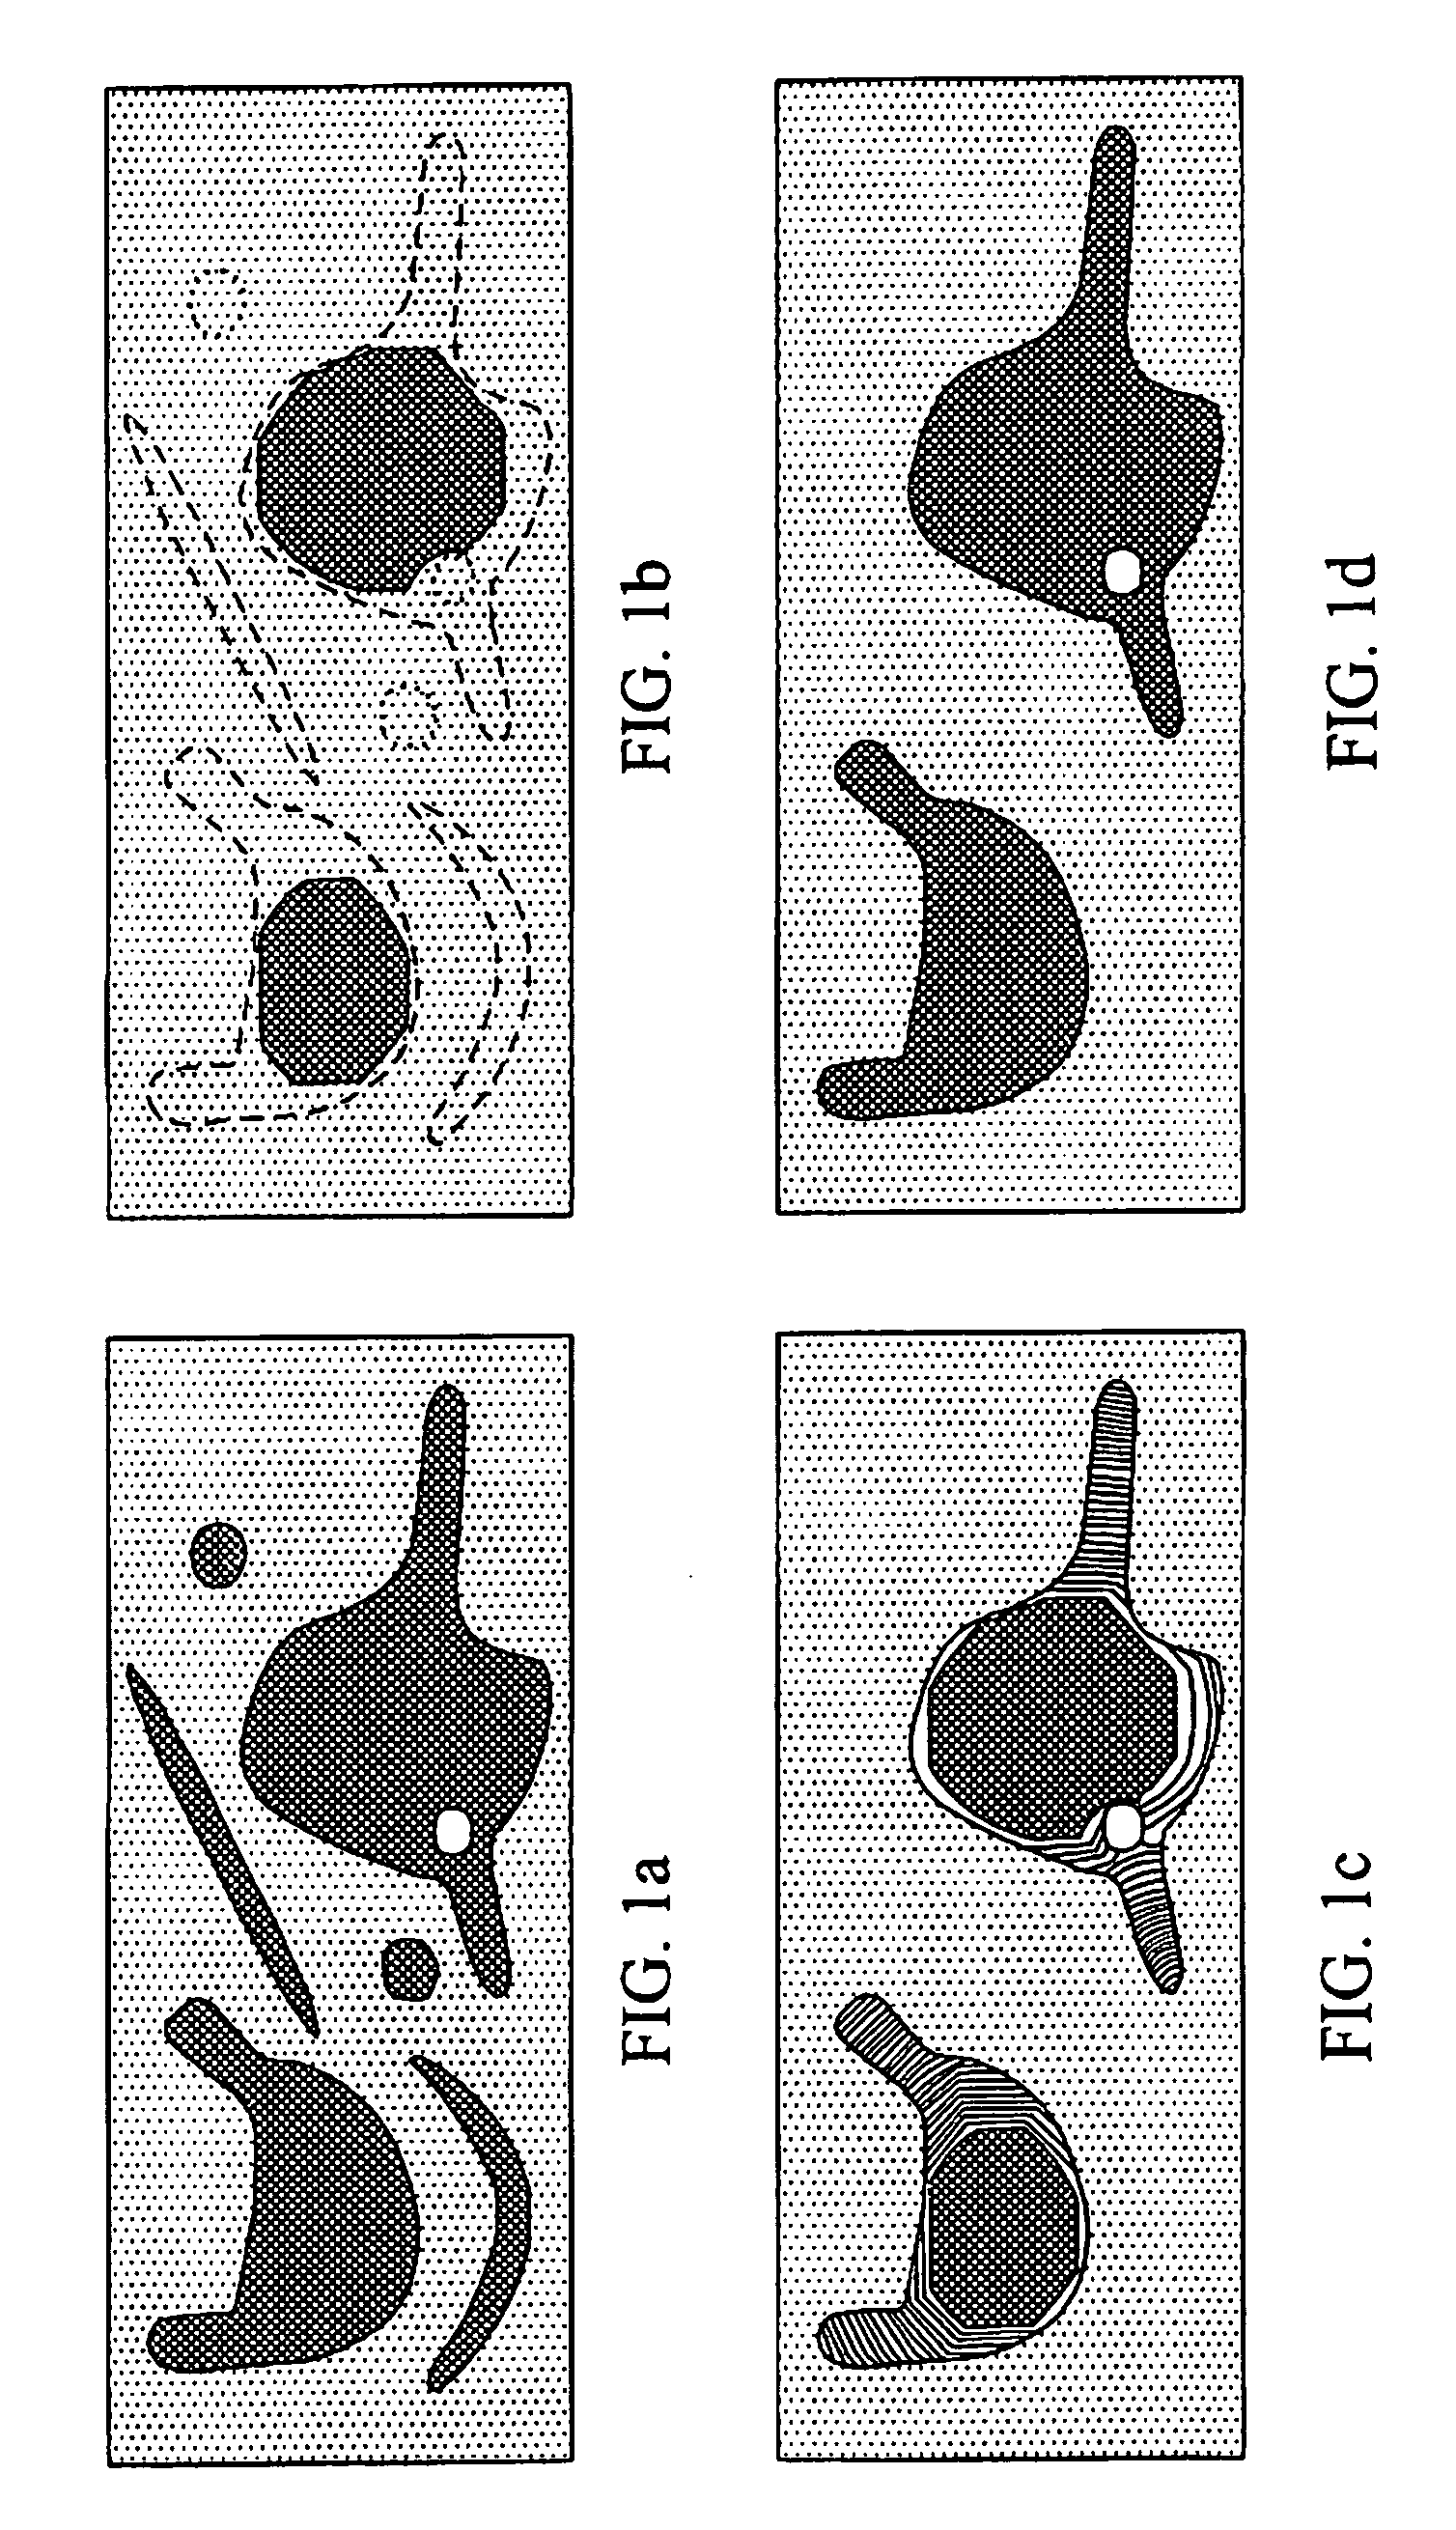 Method and apparatus for identifying visual content foregrounds